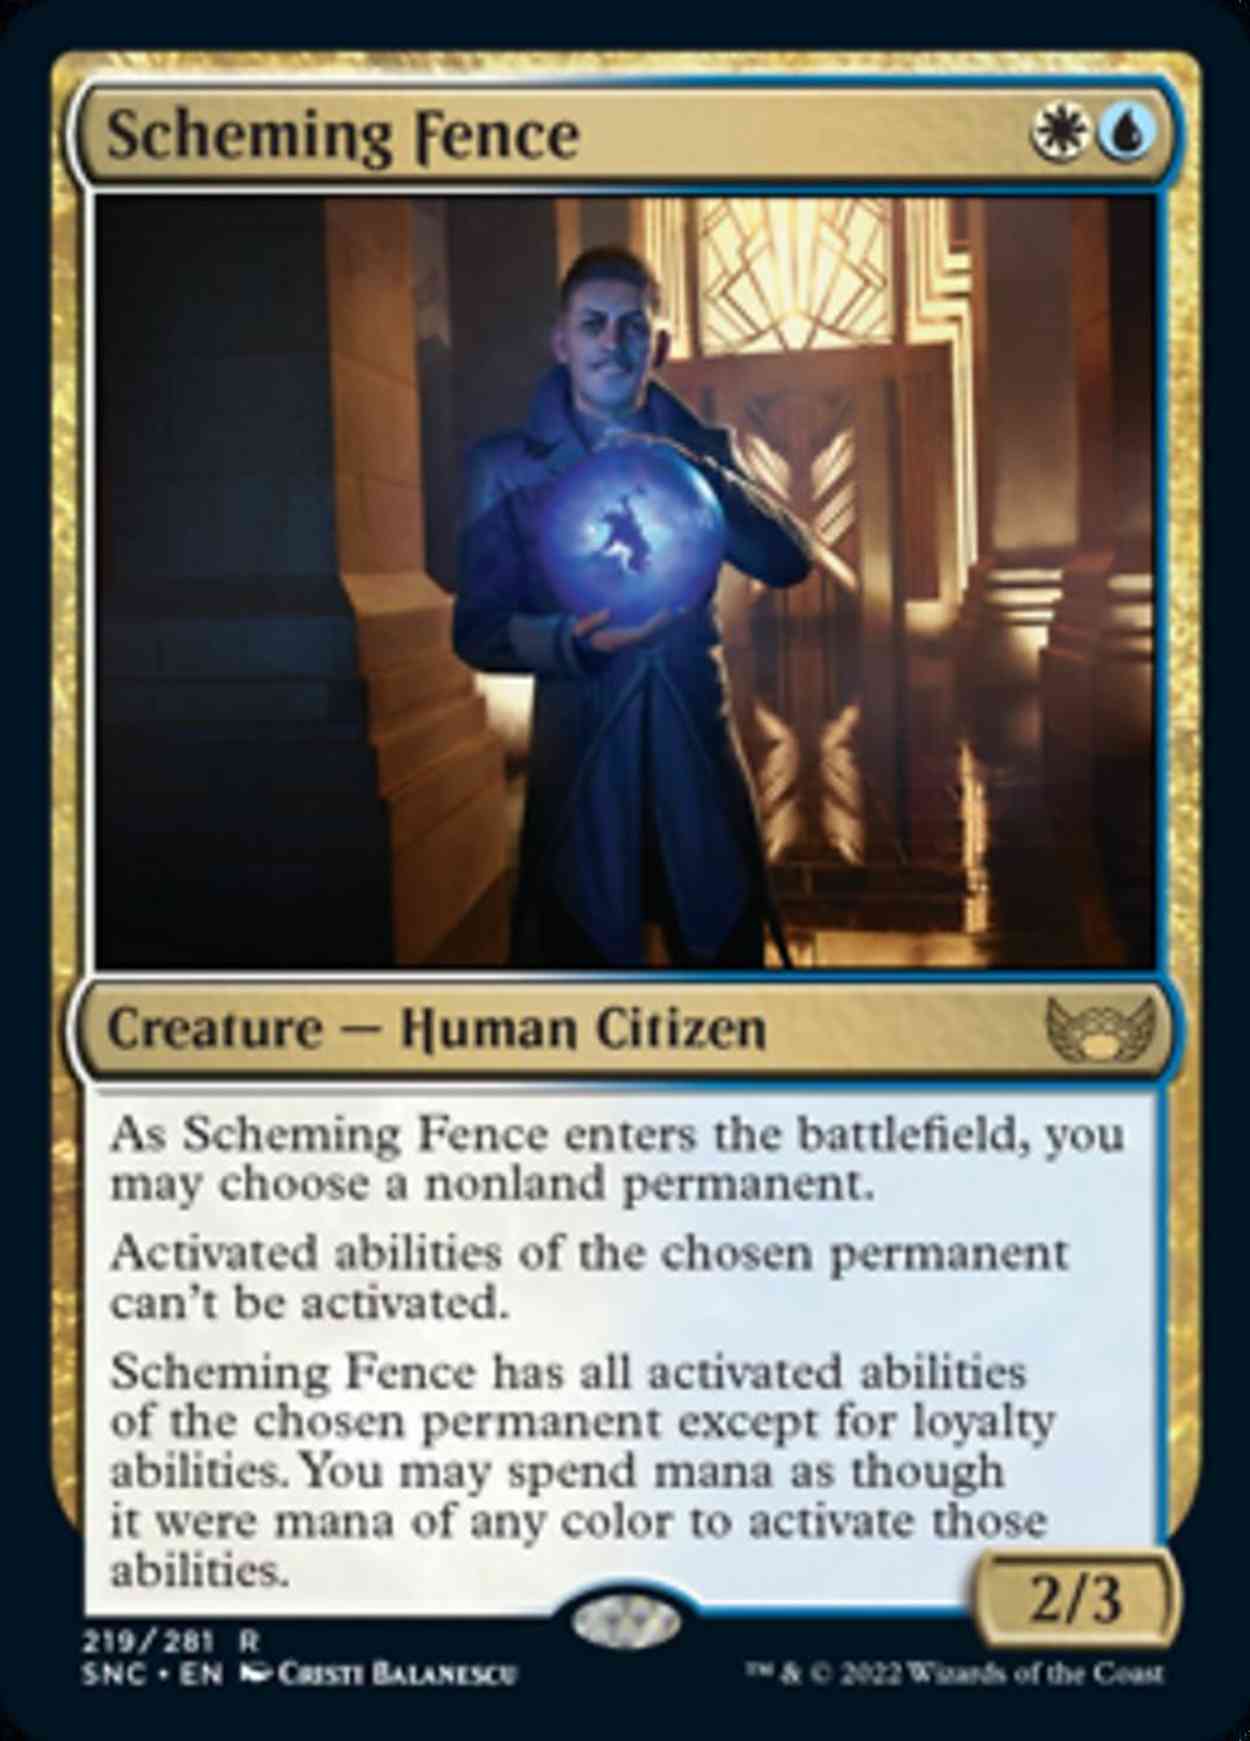 Scheming Fence magic card front